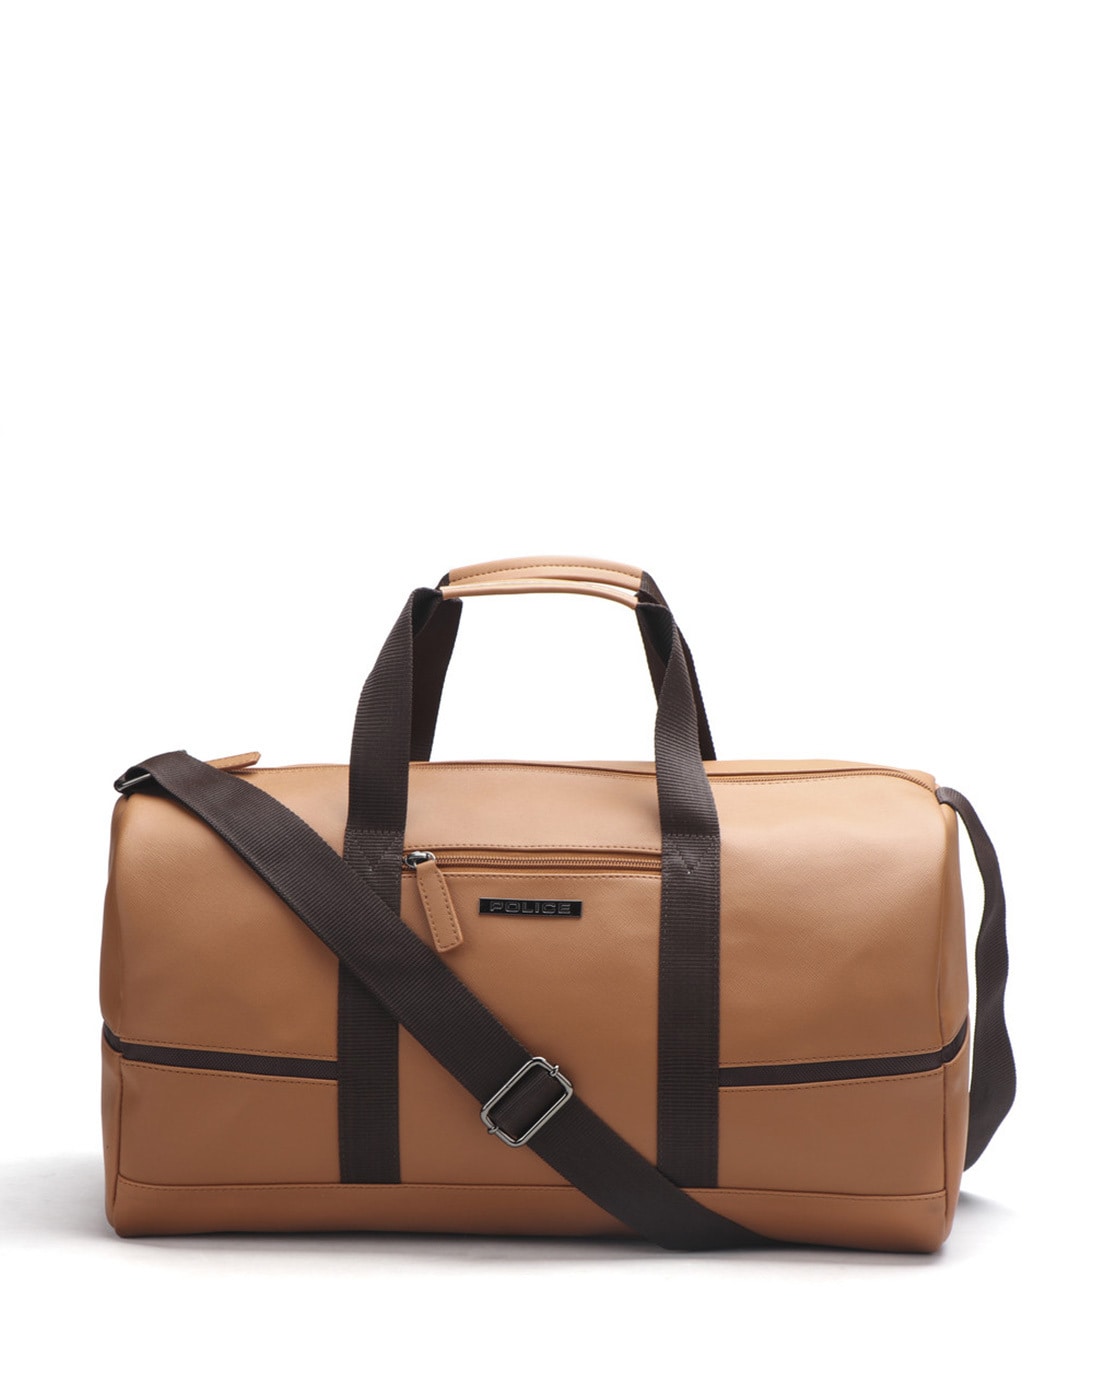 This Modern Duffel Bag Is a MustHave for Business Travelers  Entrepreneur